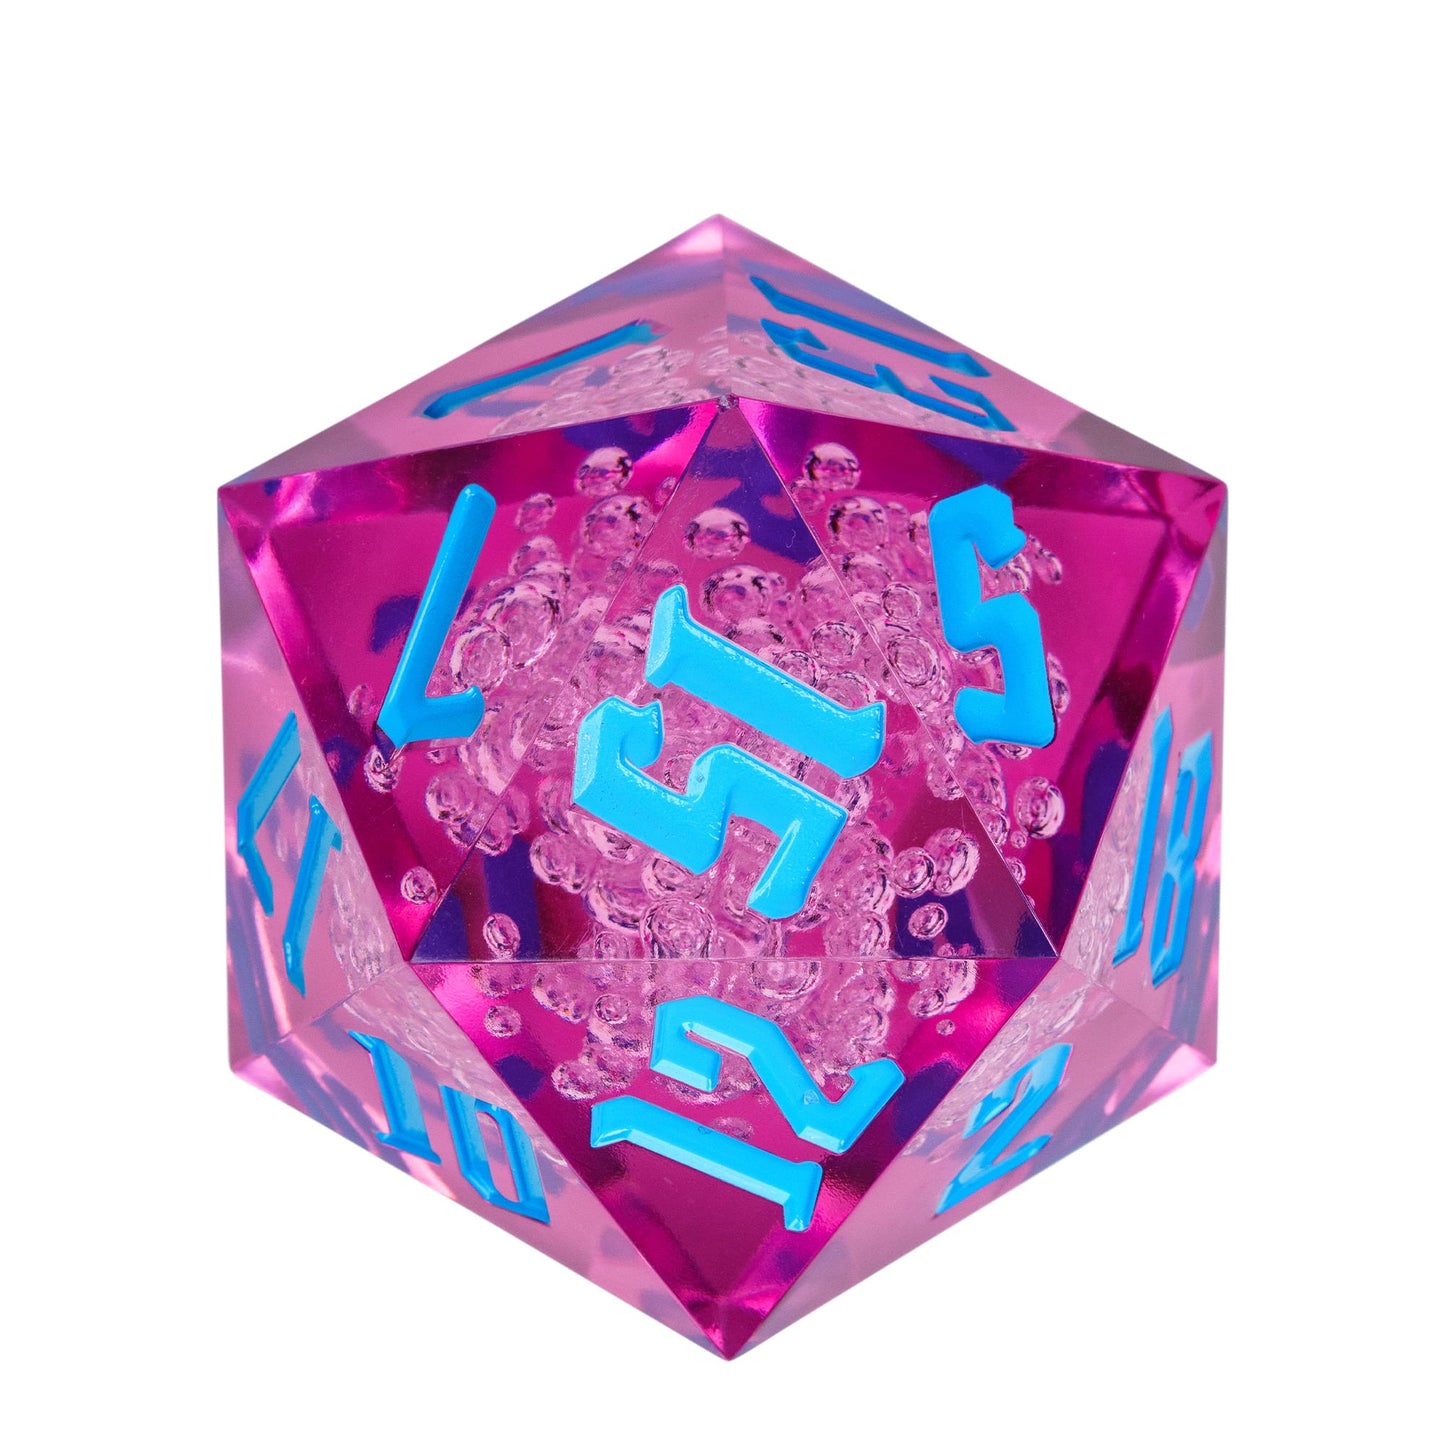 The GIANT D20